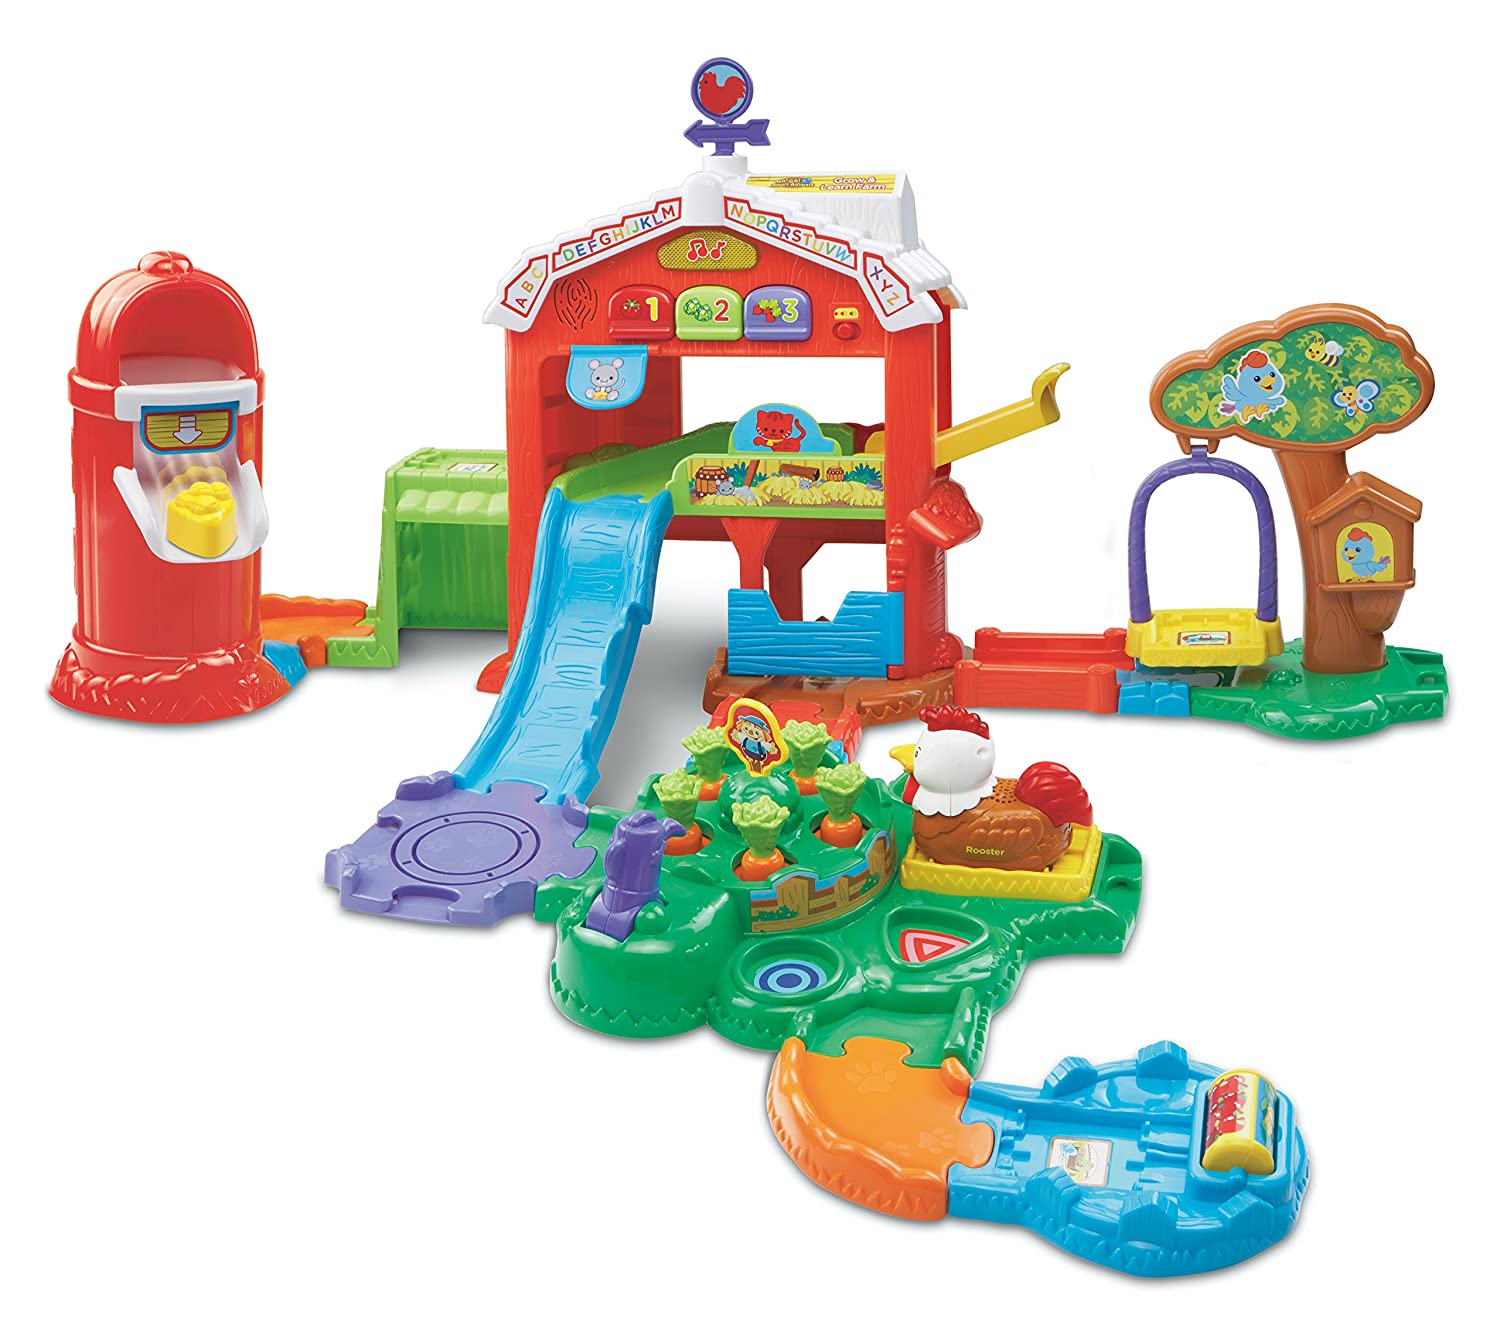 9 Best Farm Animal Toys for Toddlers 2023 - Buying Guide 8